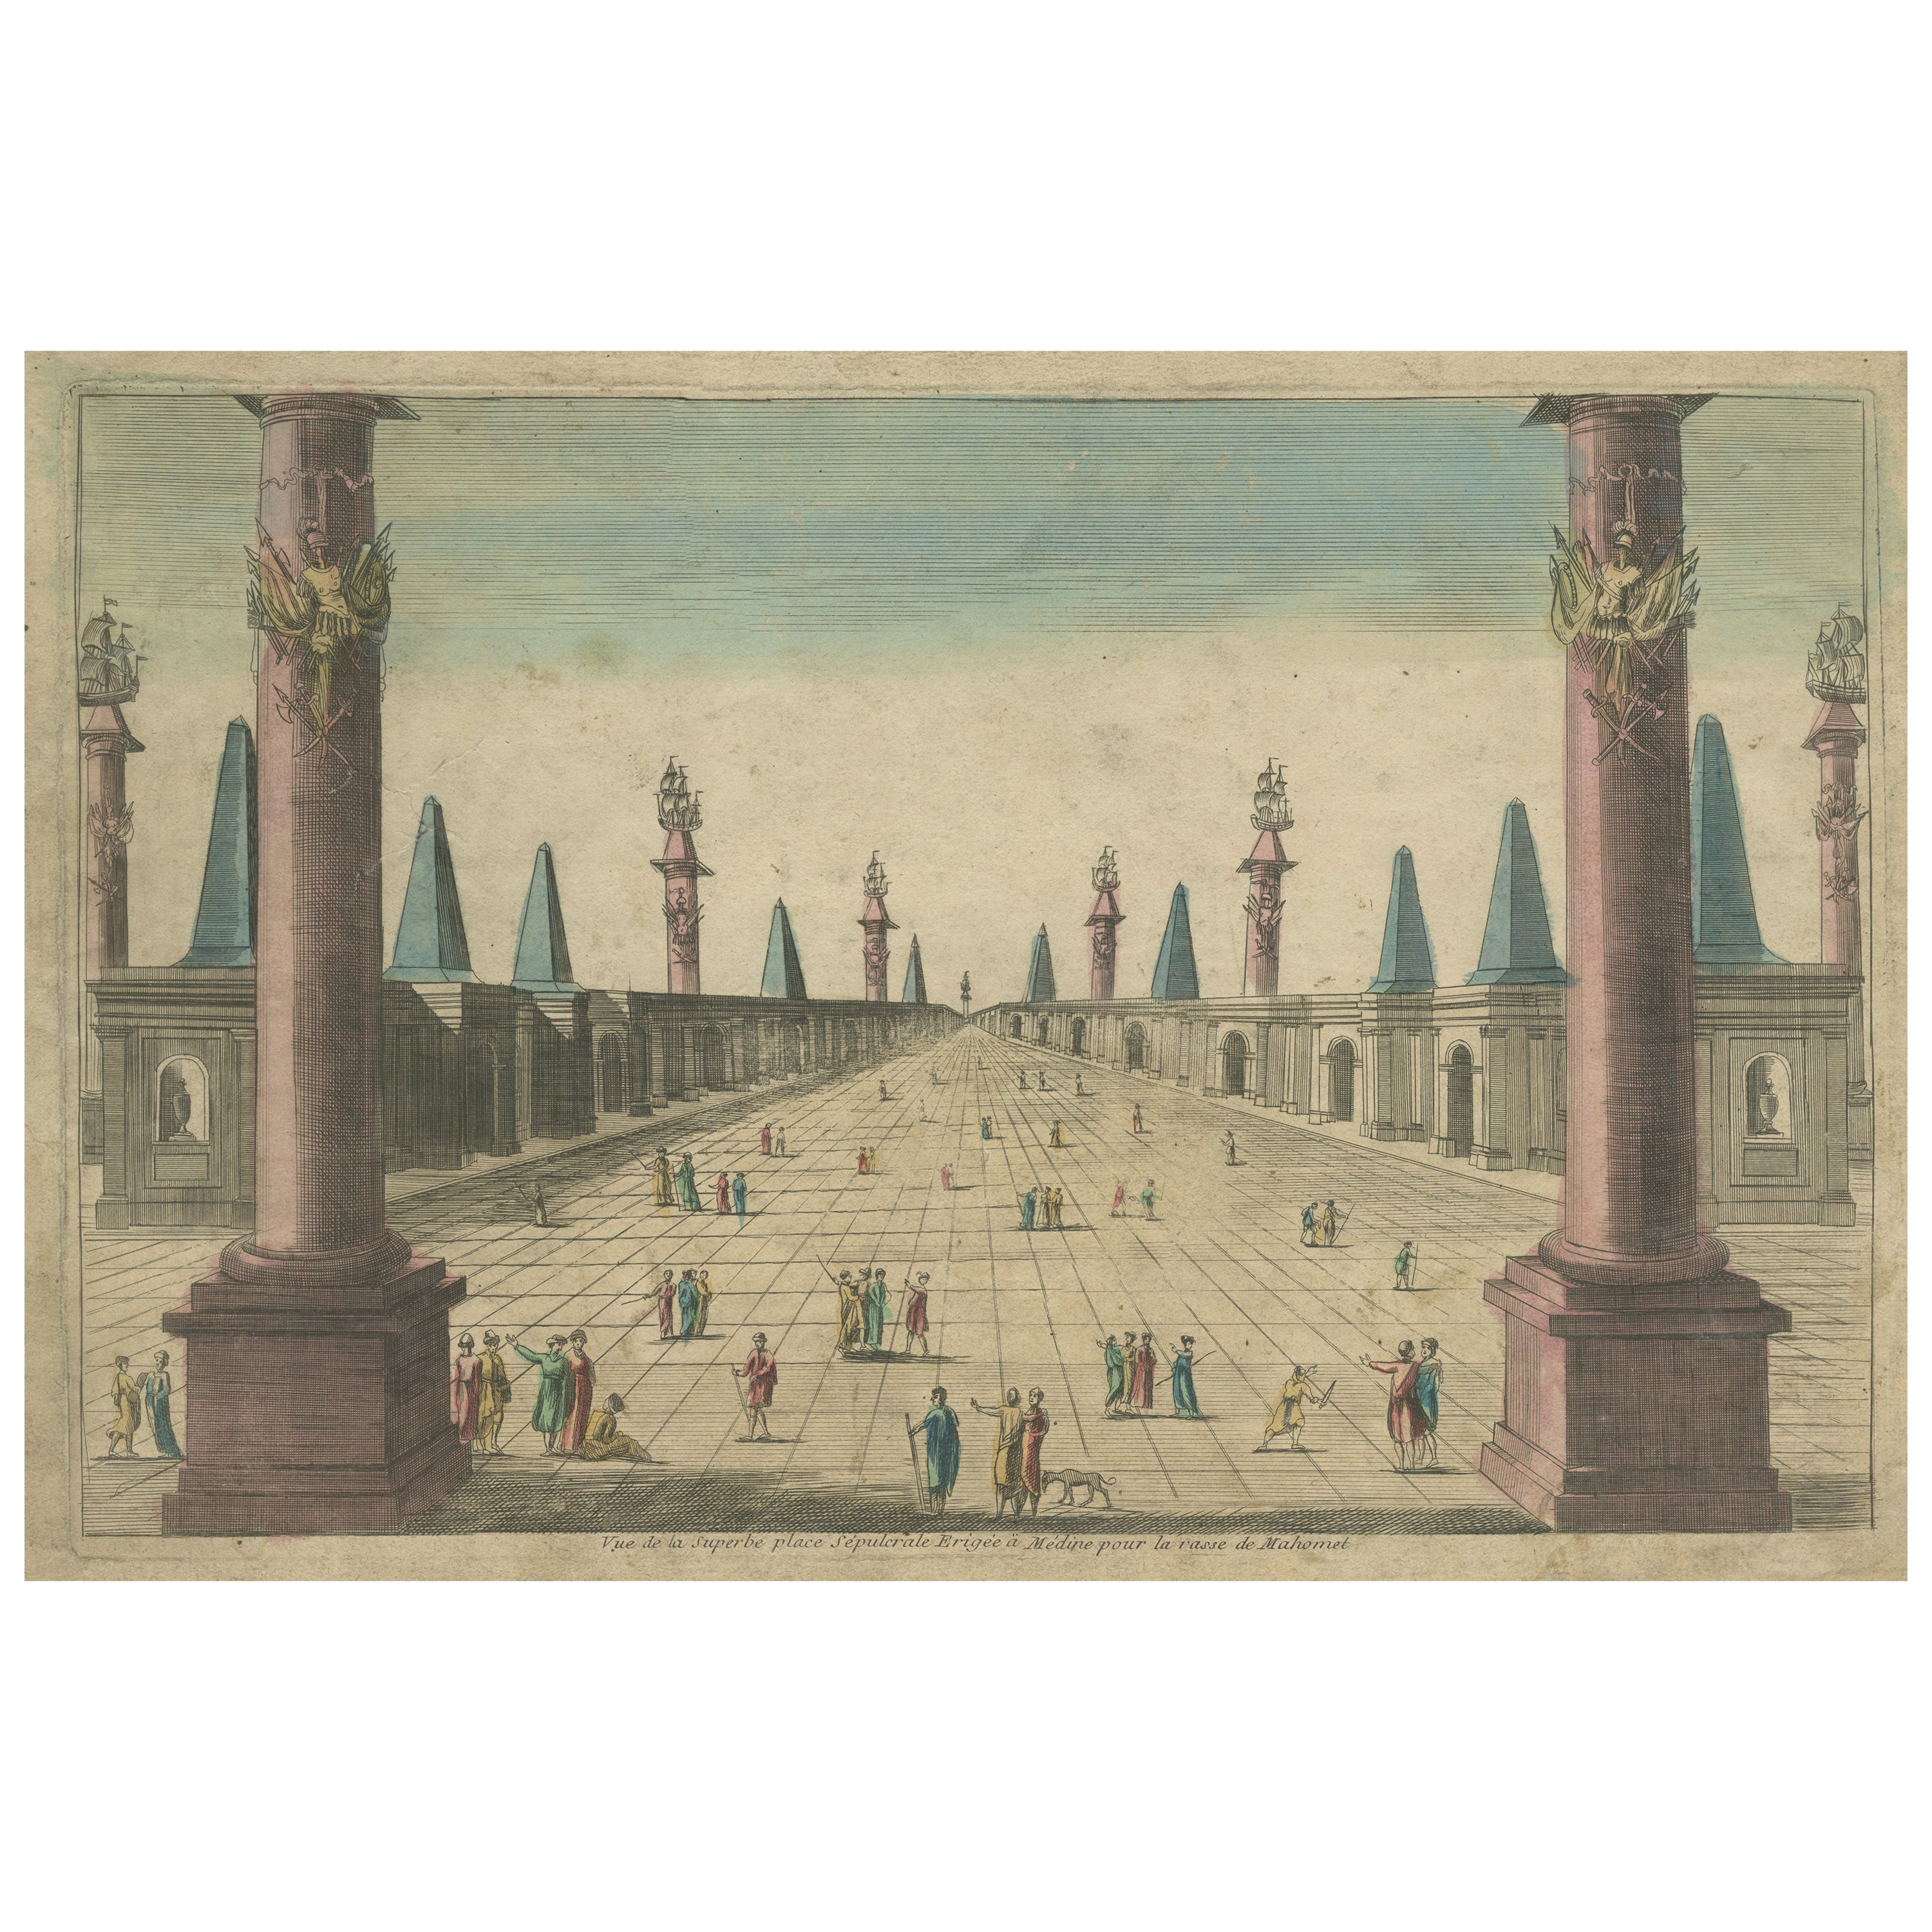 Antique Print of the Prophet's Mosque or Al-Masjid an-Nabawī in Medina